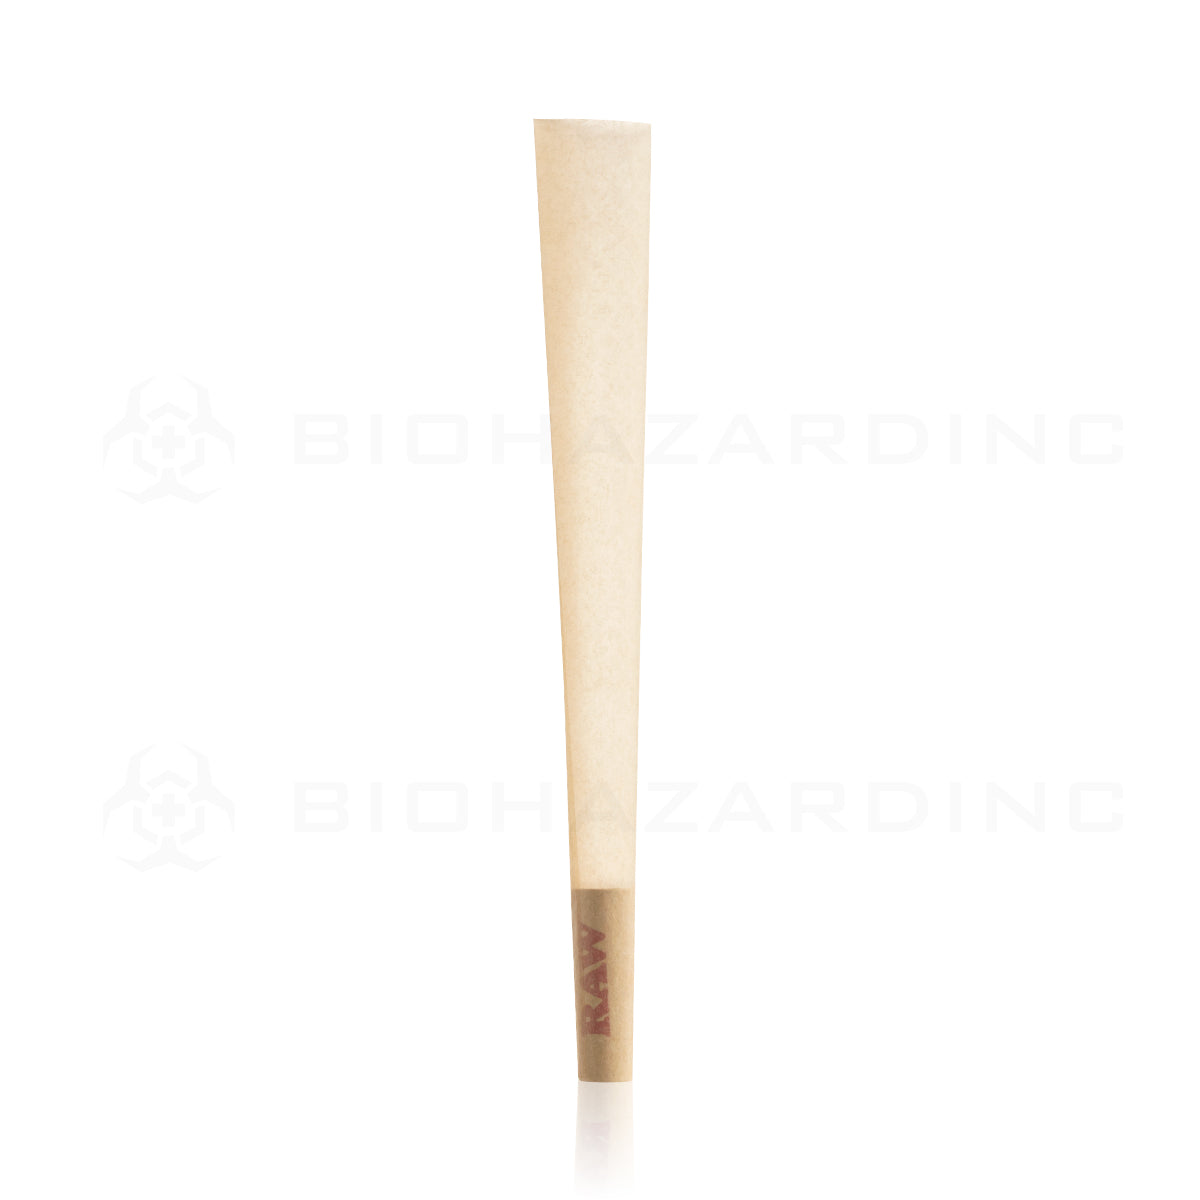 RAW® | 98 Select Pre-Rolled Cones | 98mm - Unbleached Paper - 1,000 Count